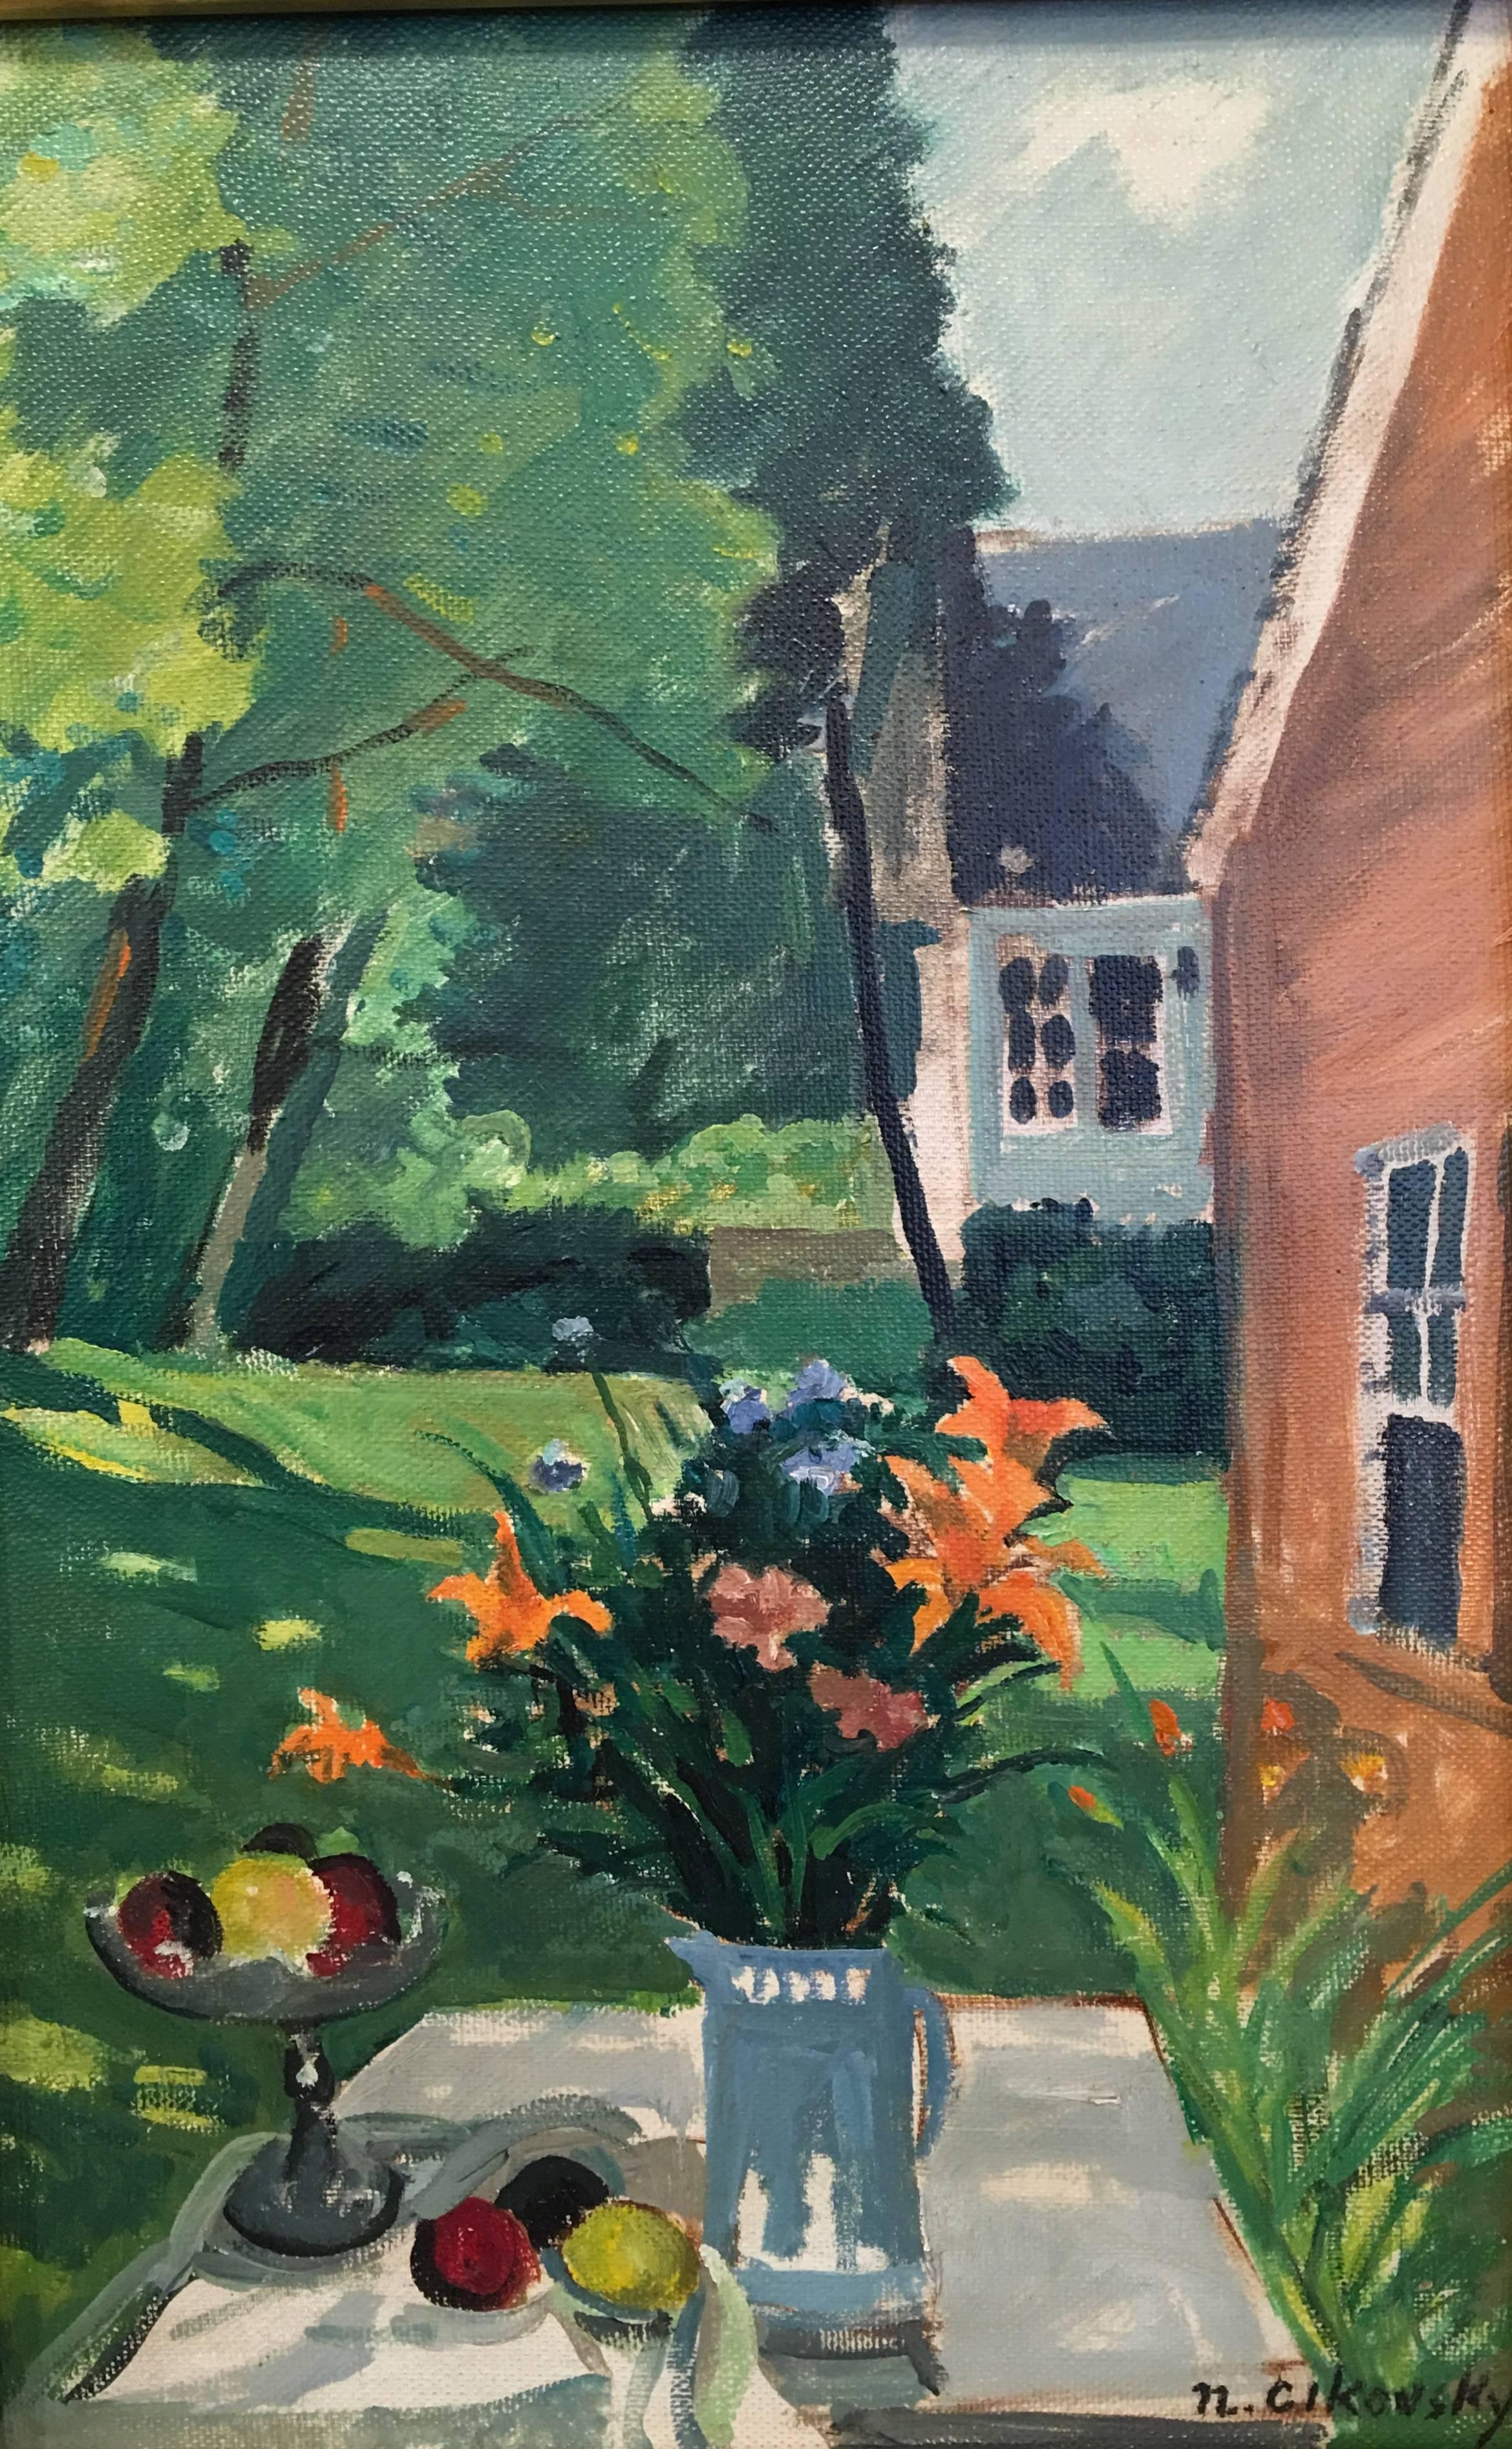 American post-impressionist painting, "Southampton Garden Still Life
by Nicola Cikovsky, circa 1940s.
Oil on canvas.
Gold frame.